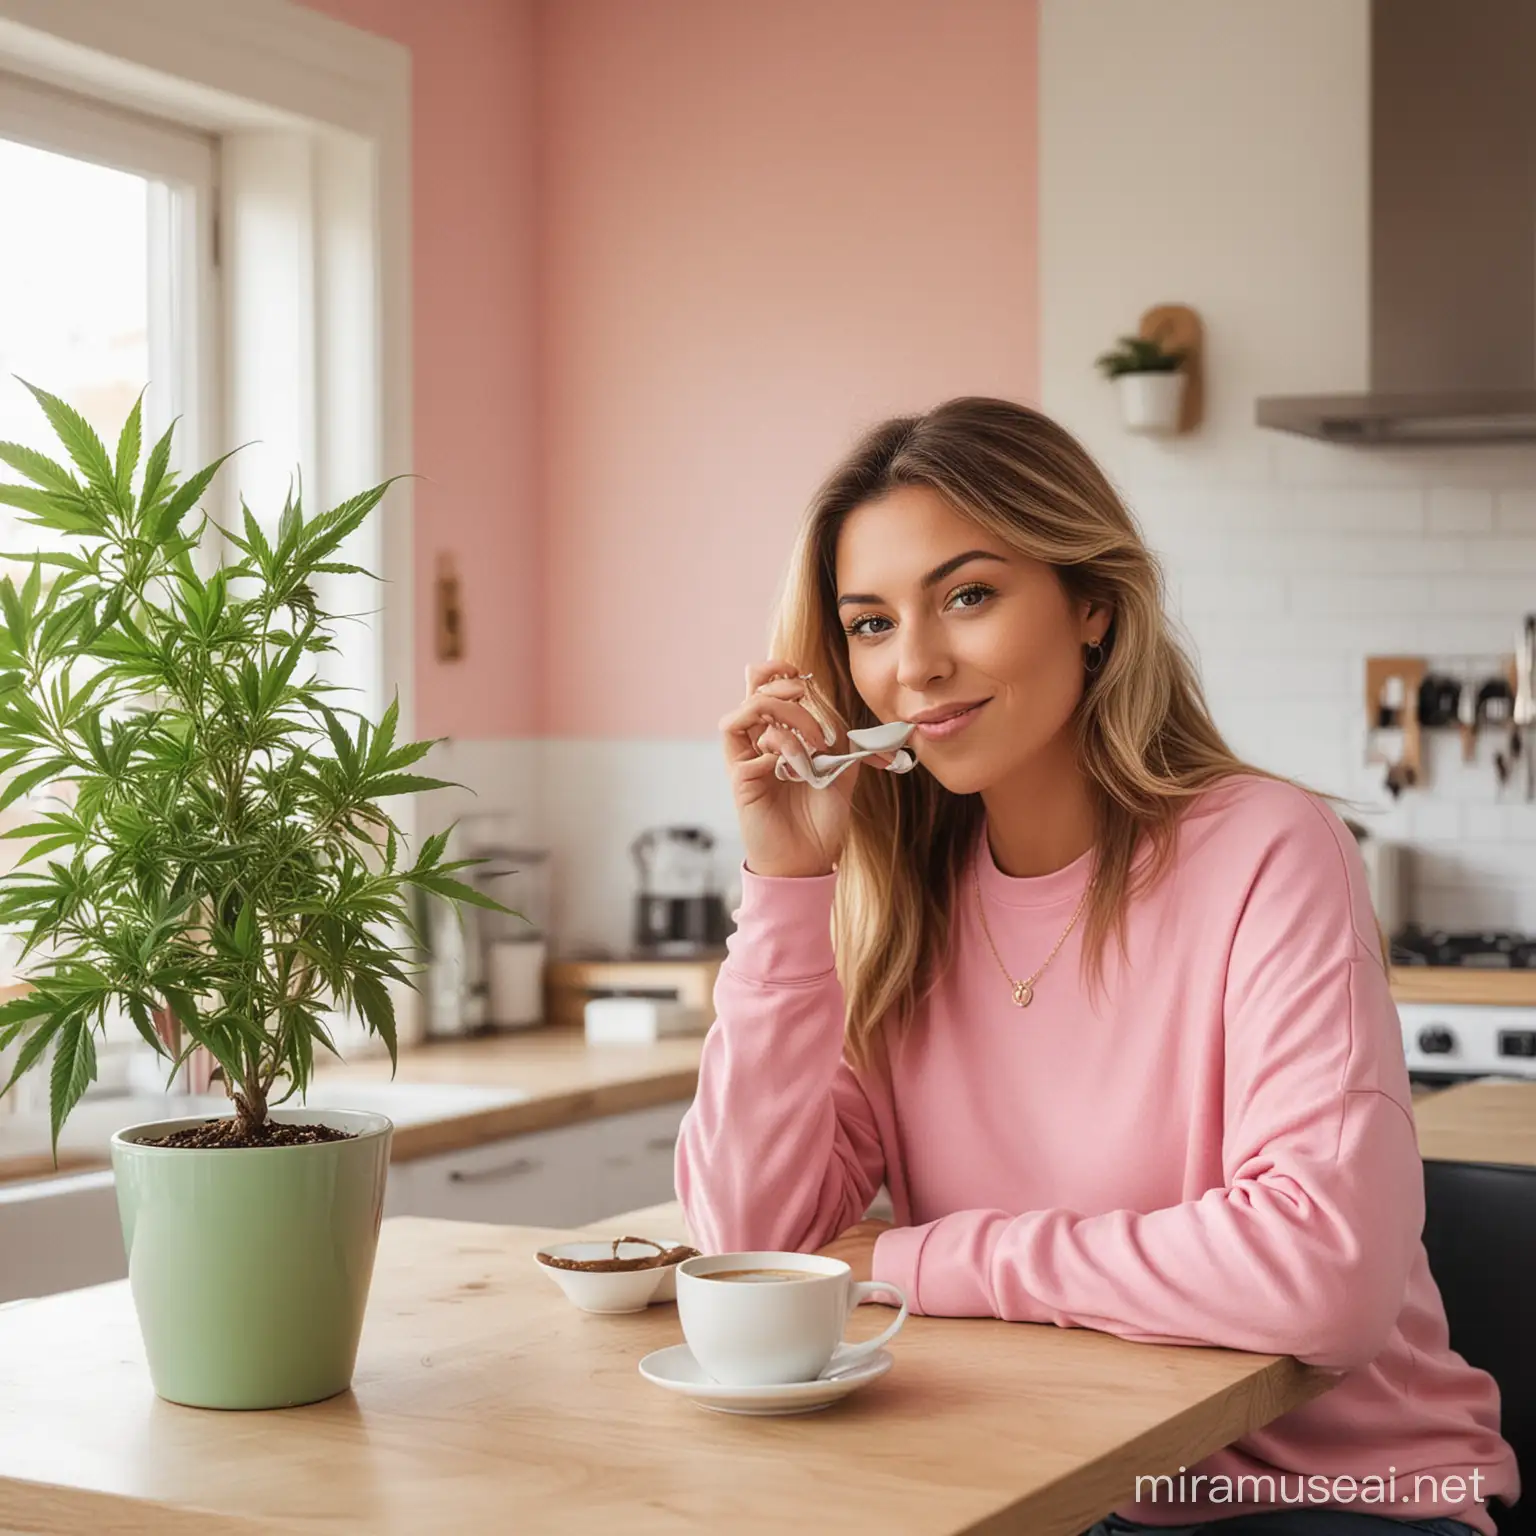 Woman Enjoying Coffee with Cannabis Plant in Kitchen Ambiance